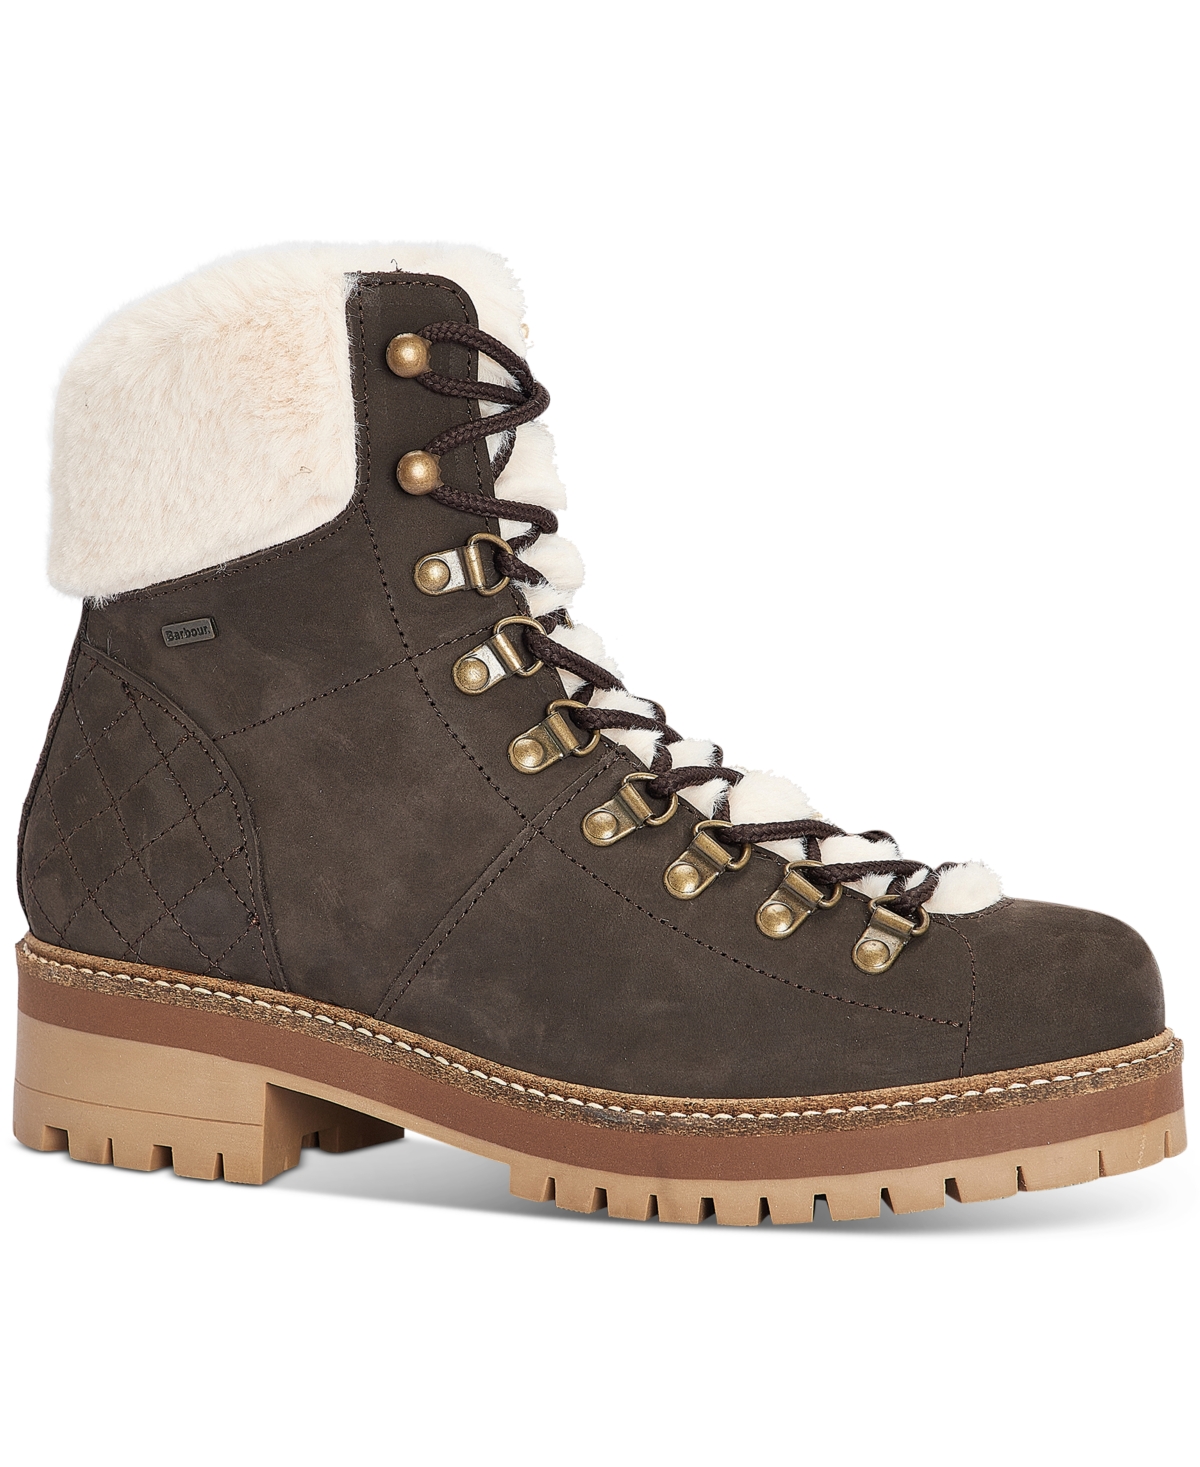 BARBOUR WOMEN'S HOLLY LACE-UP COLD-WEATHER BOOTIES